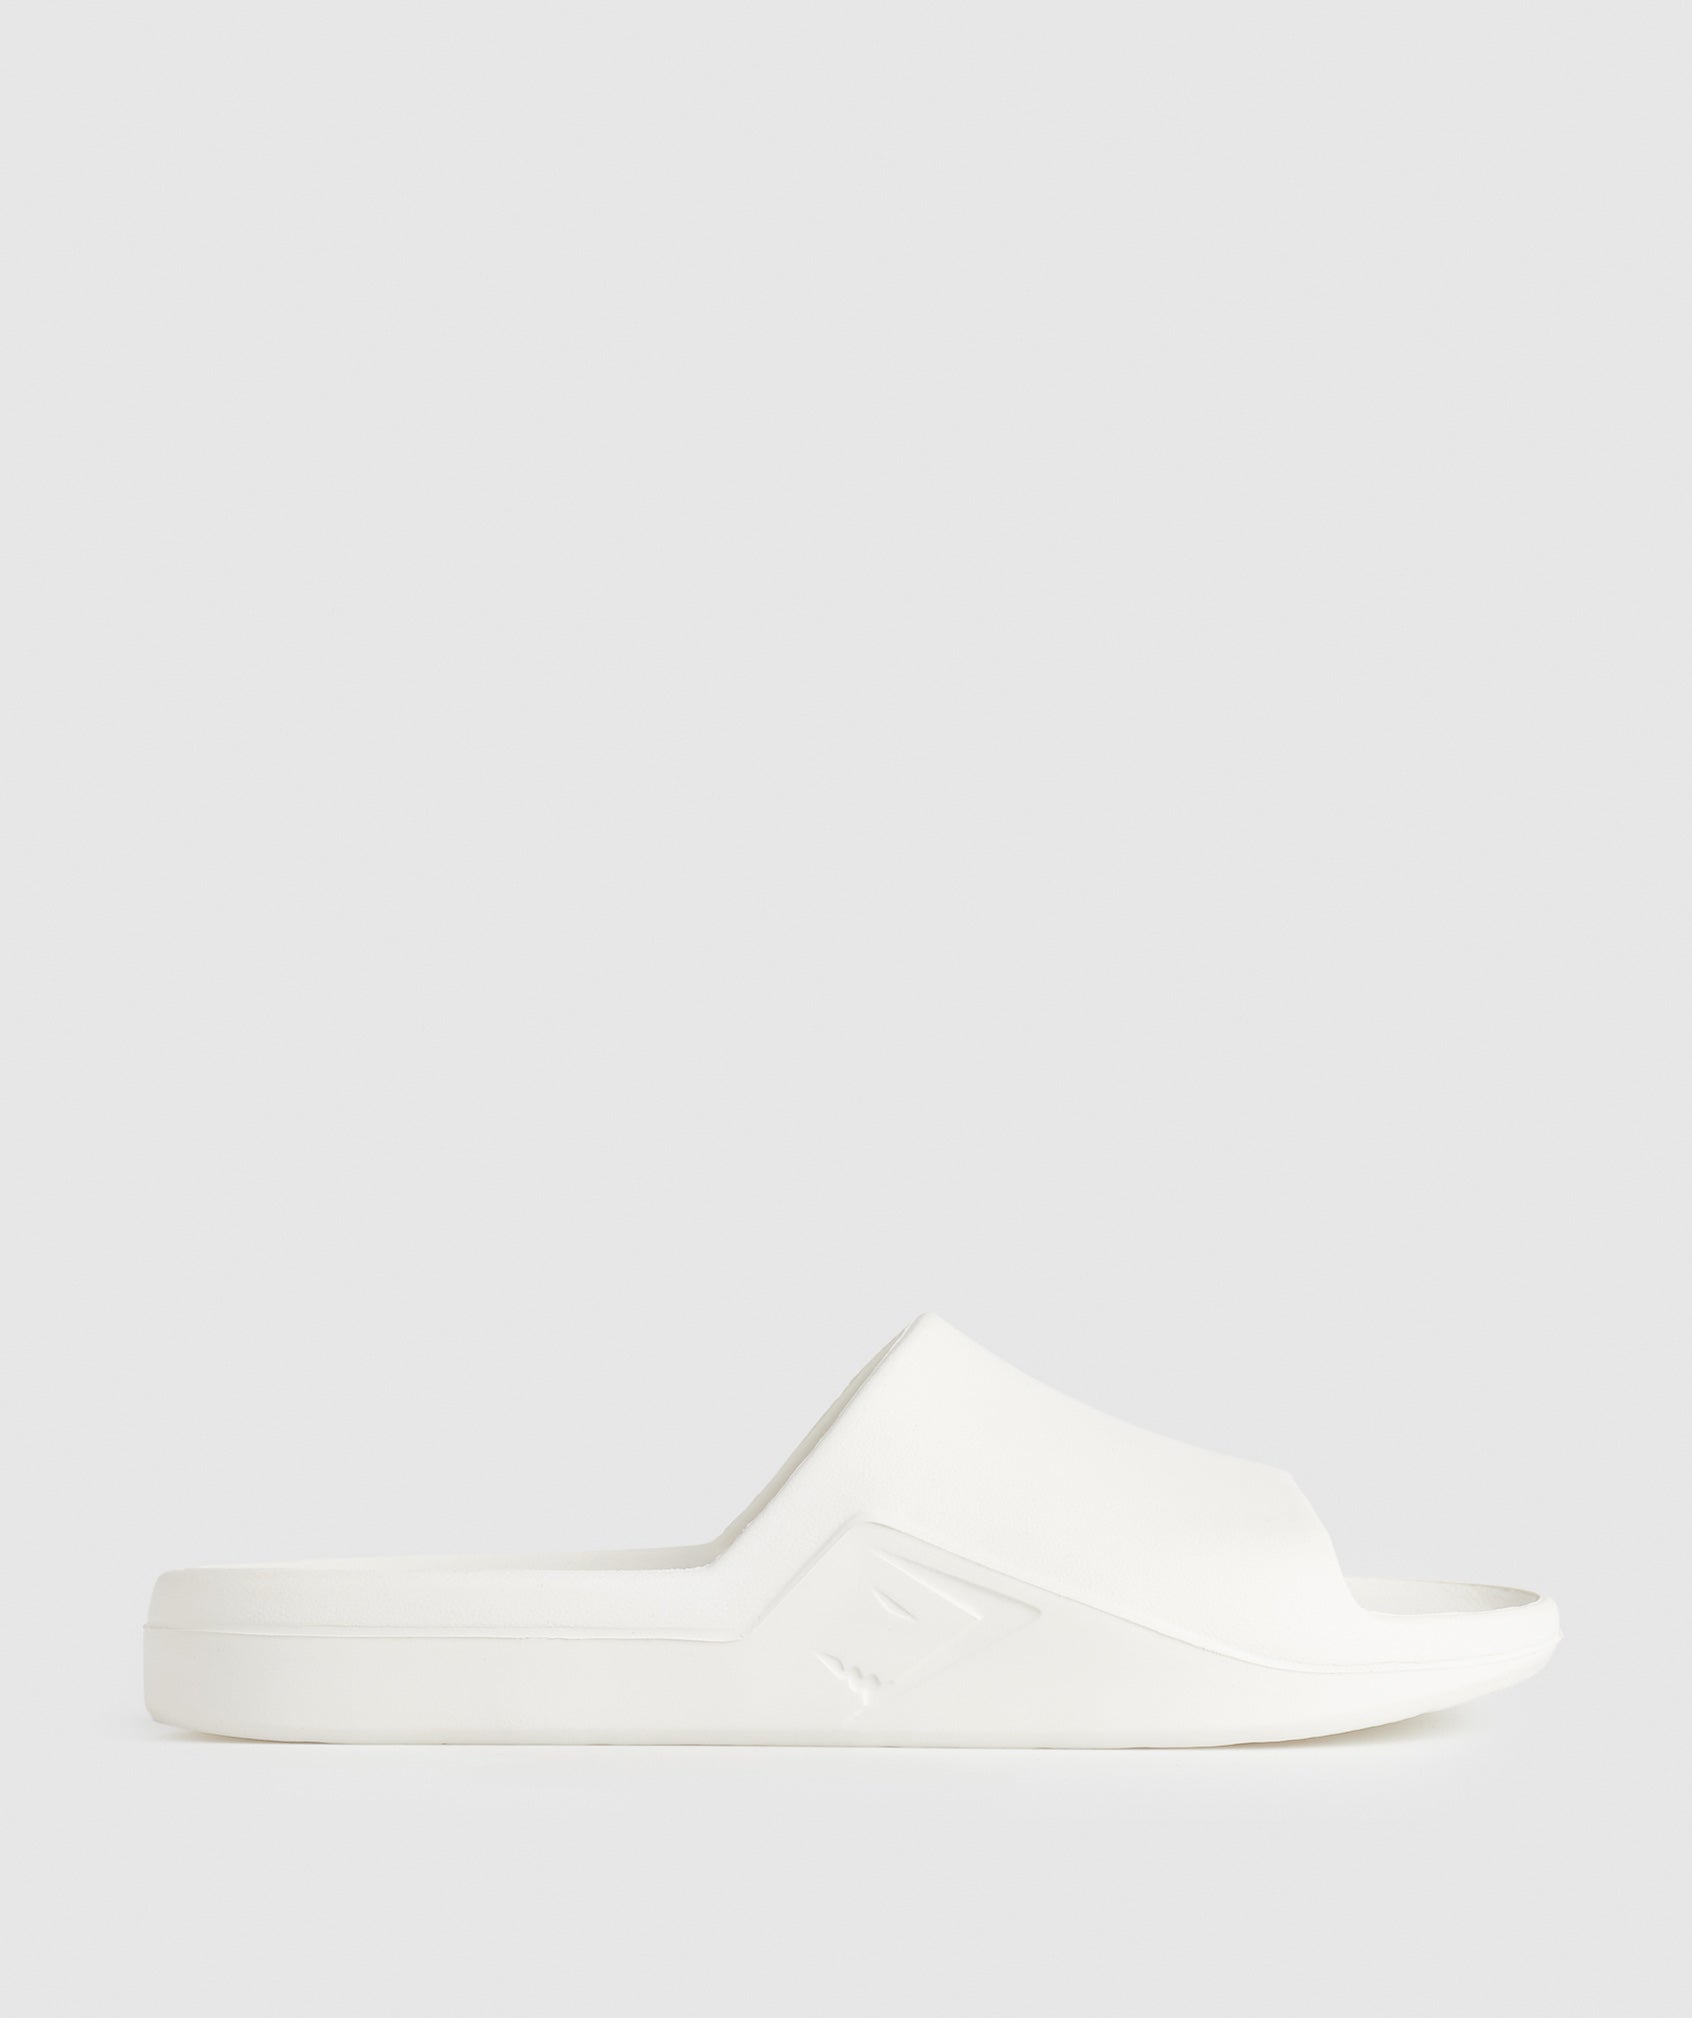 Rest Day Slides in Off White - view 2